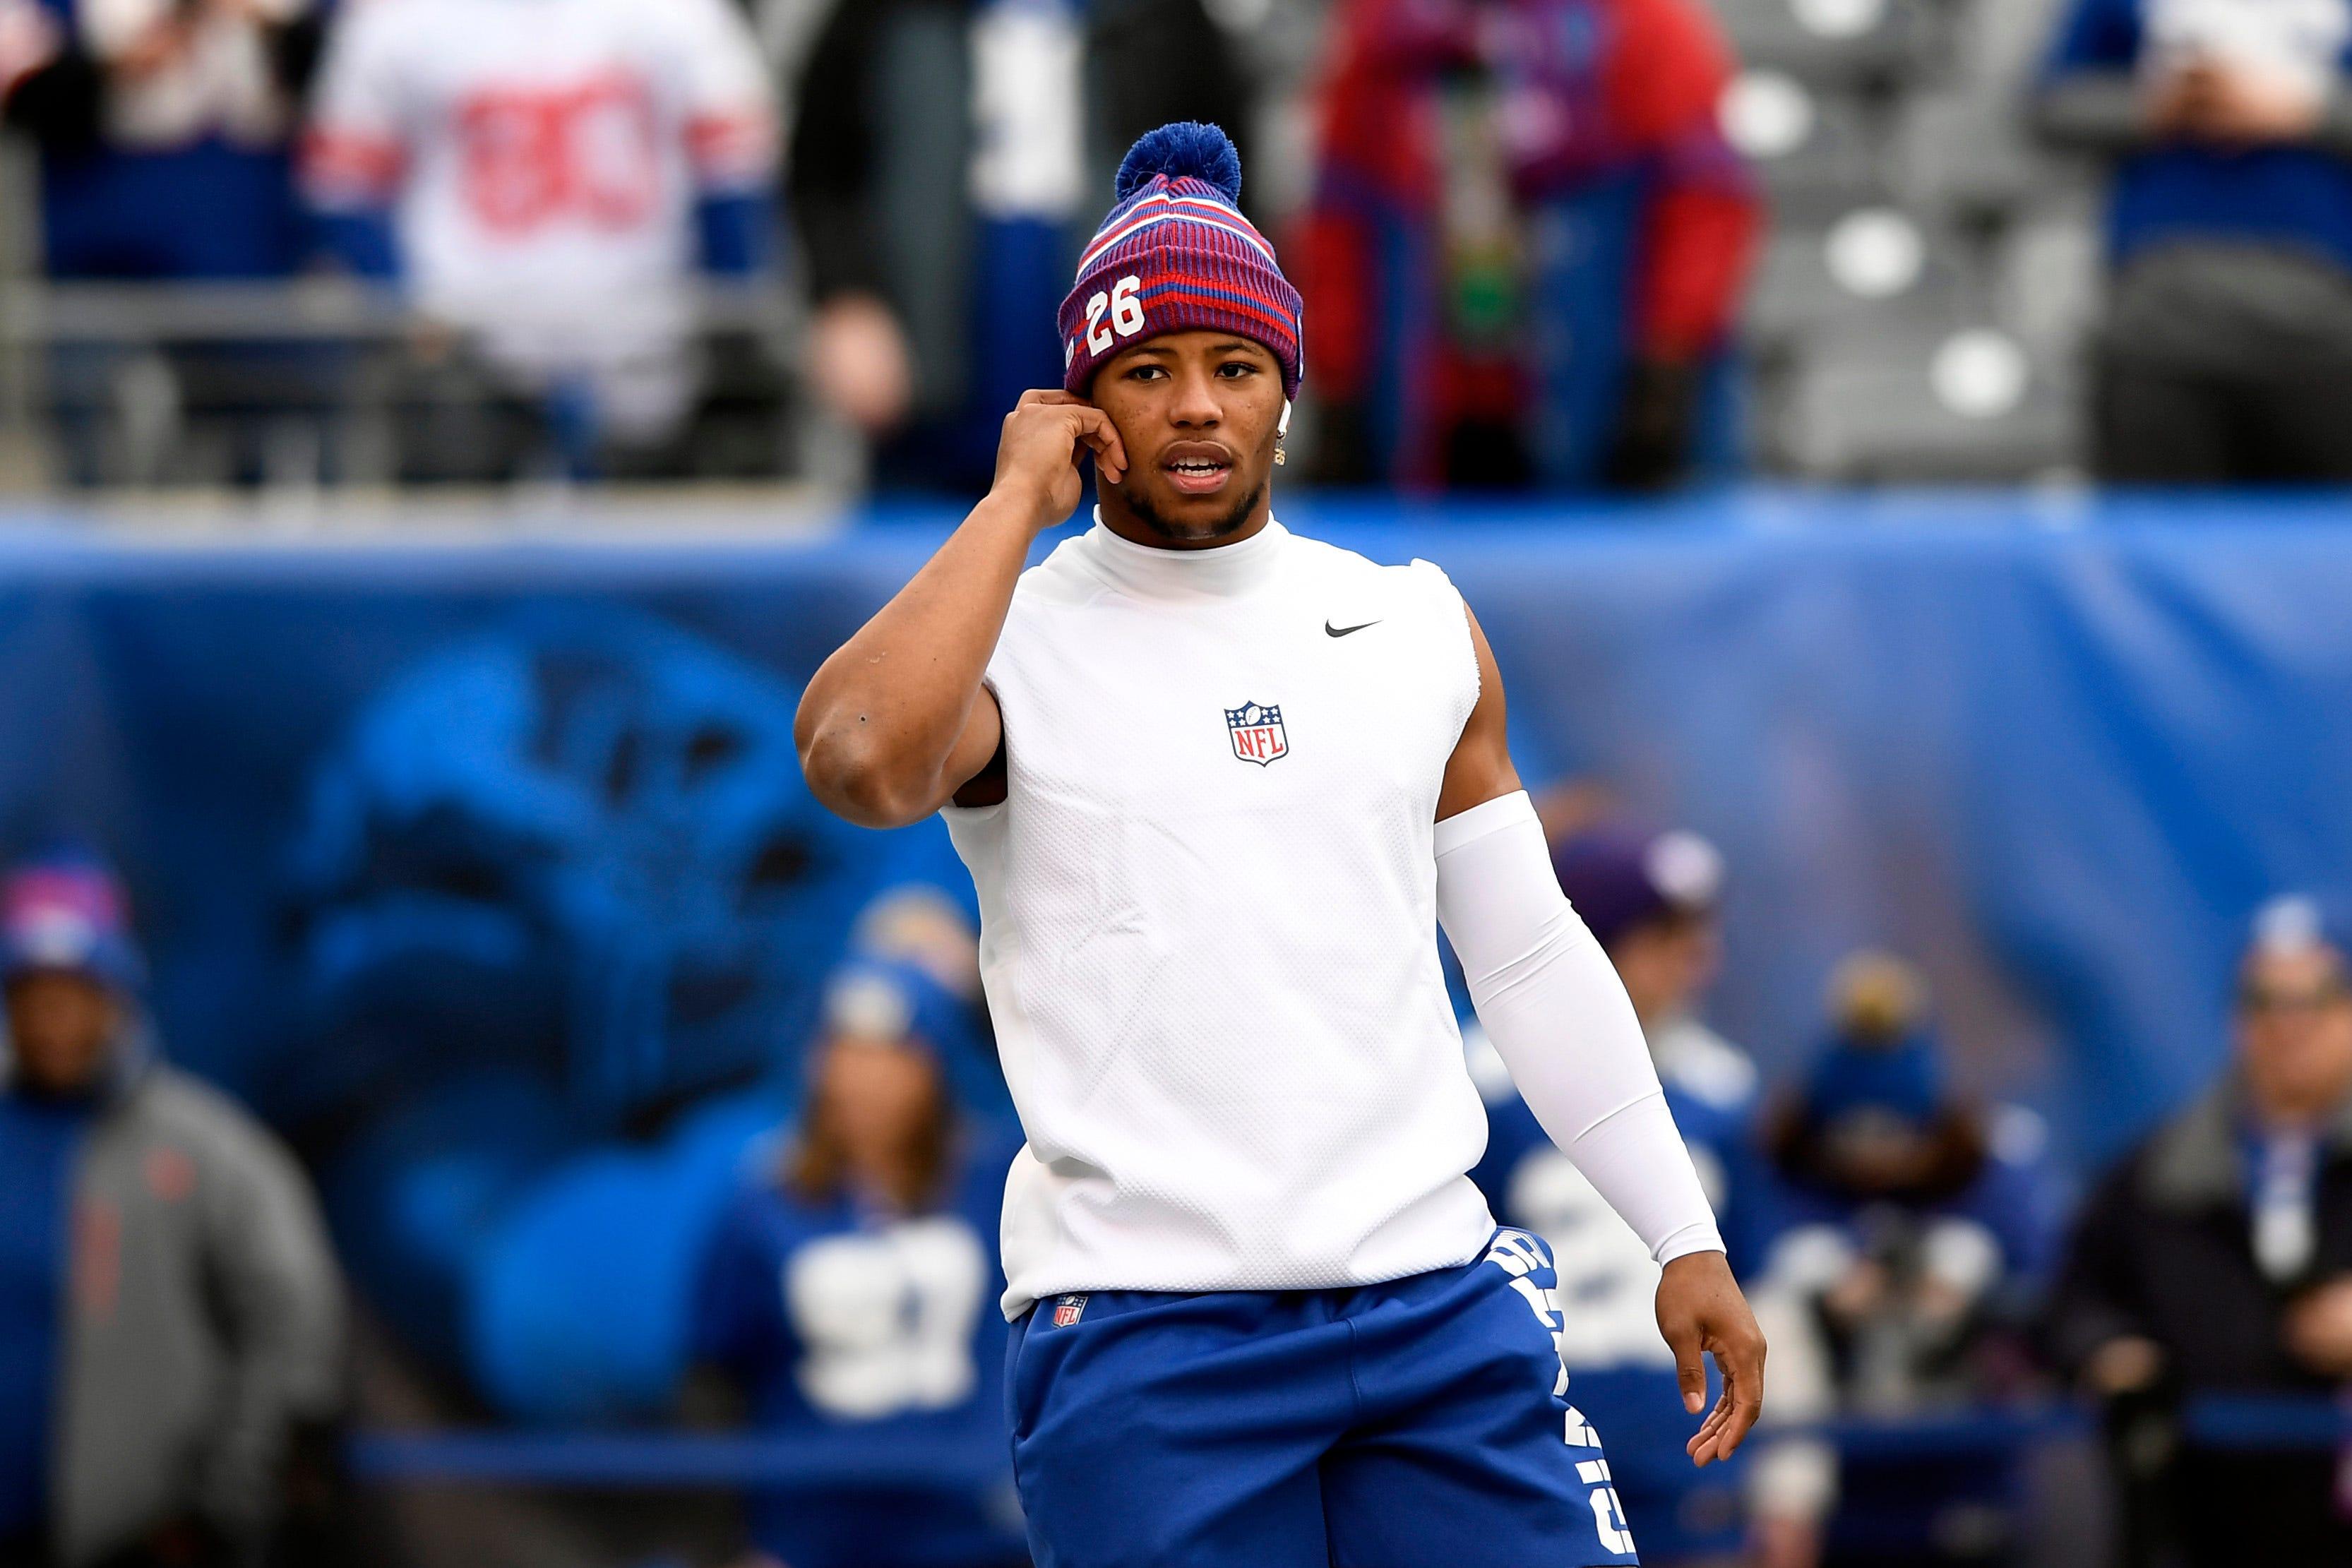 Saquon Barkley warms up before game with beanie on / USA TODAY